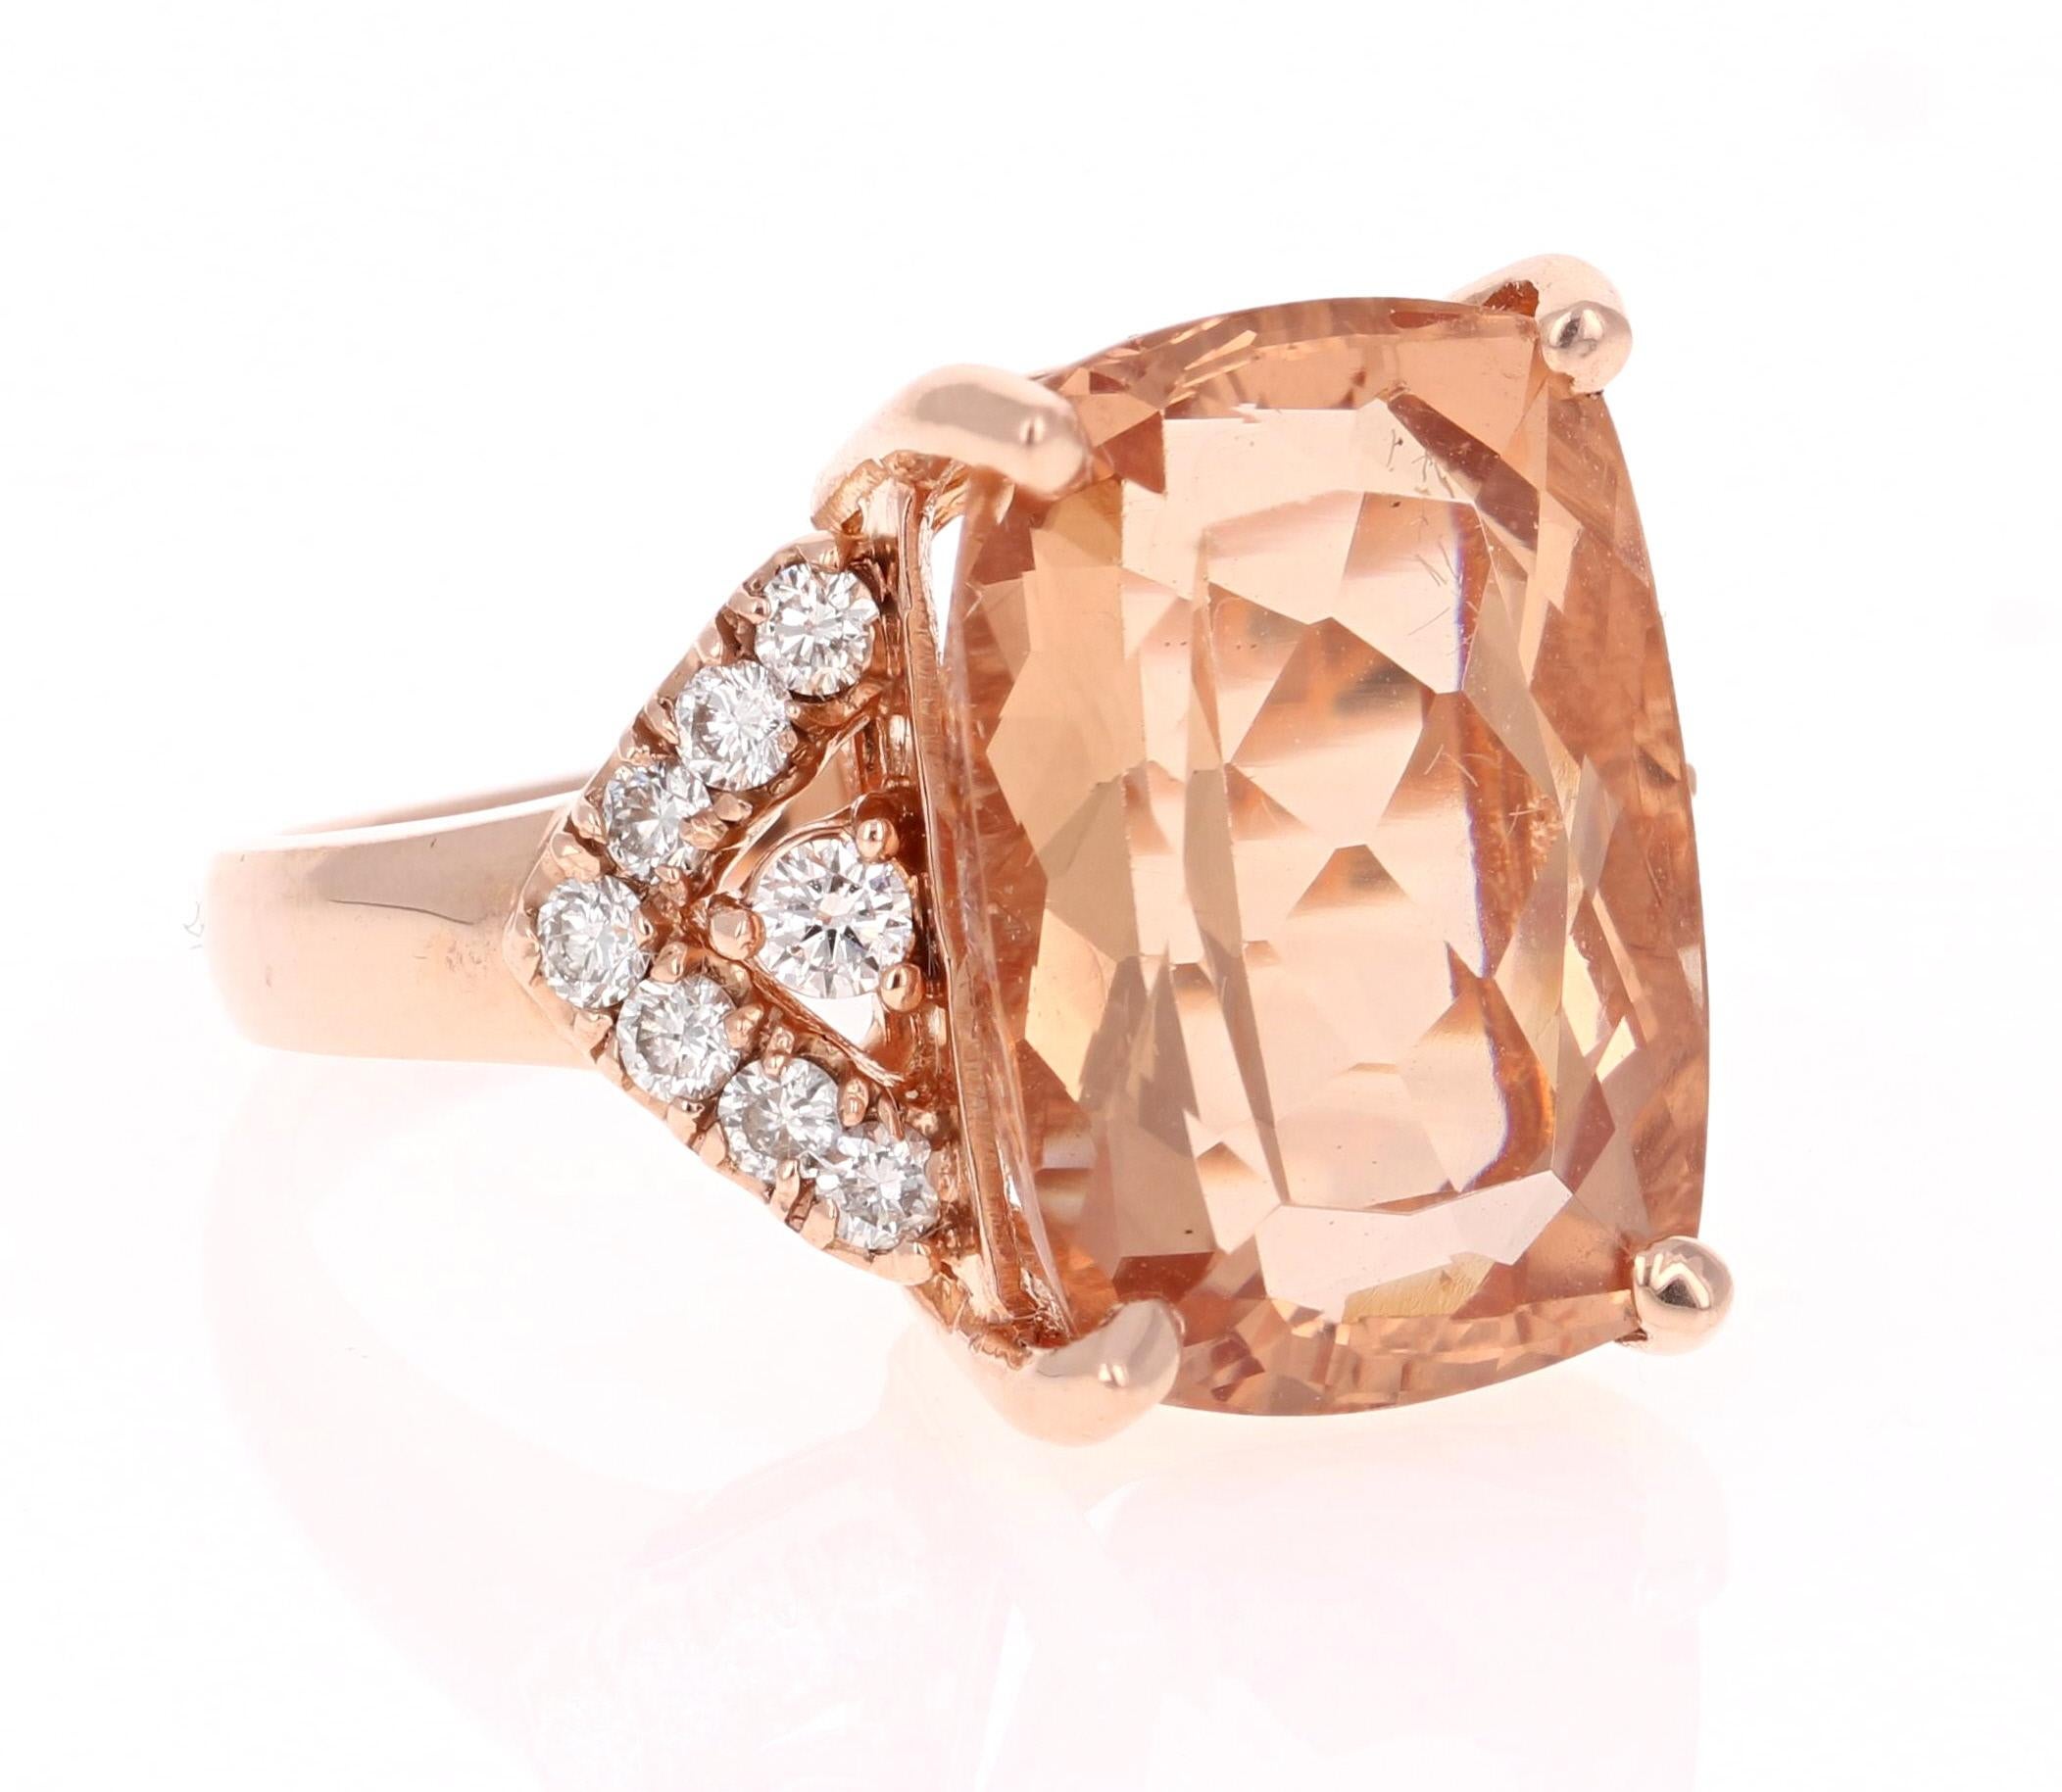 This gorgeous, classy and large Morganite Ring has a 11.54 Carat Rectangular Cushion Cut Morganite as its center and has 16 Round Cut Diamonds that weigh 0.54 carats. The clarity and color of the diamonds are VS-H.   The total carat weight of the